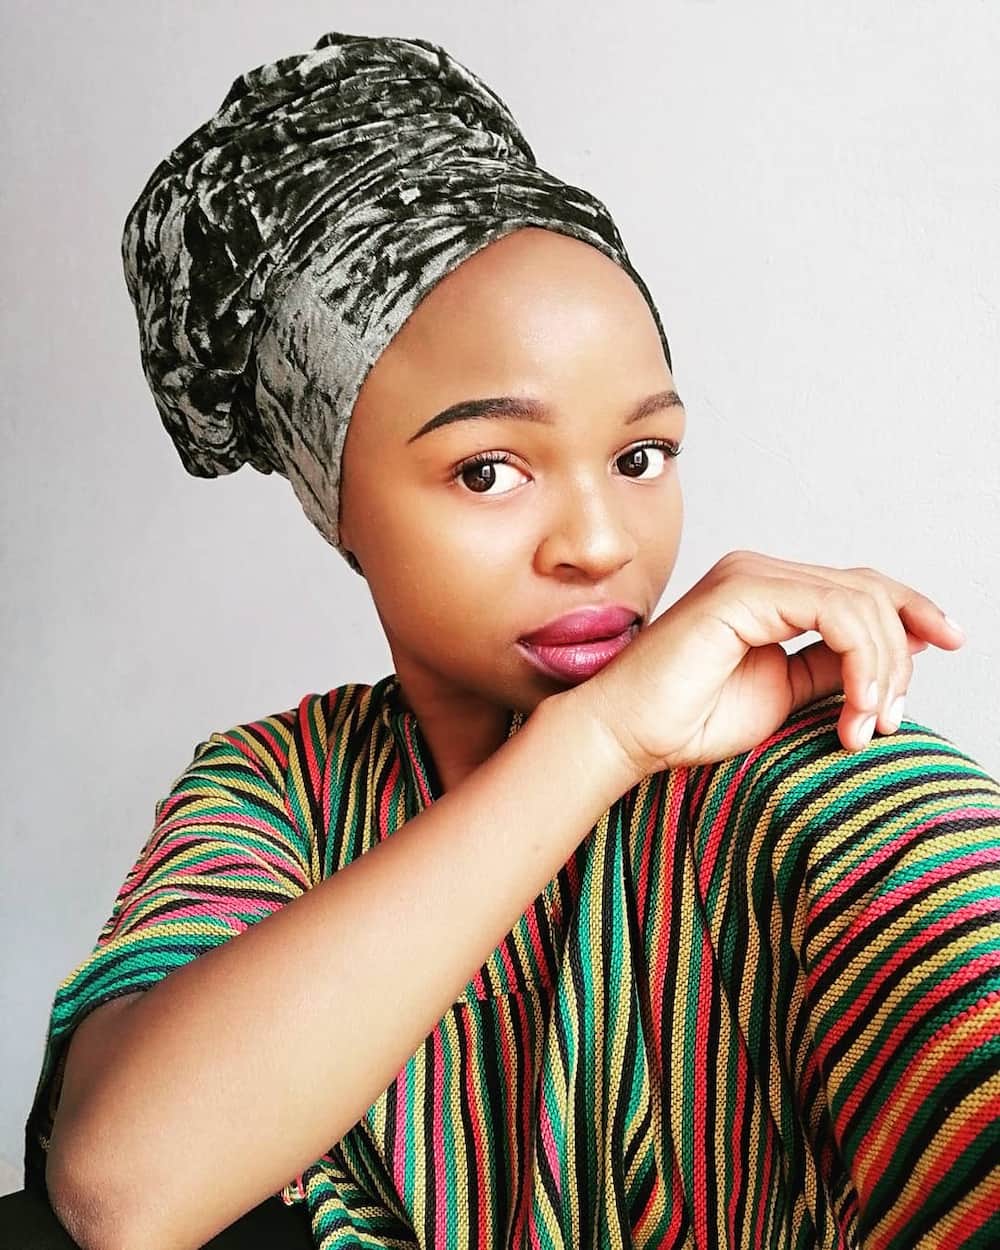 Naledi Chirwa biography: age, nationality, education, actor and video (fees must fall)